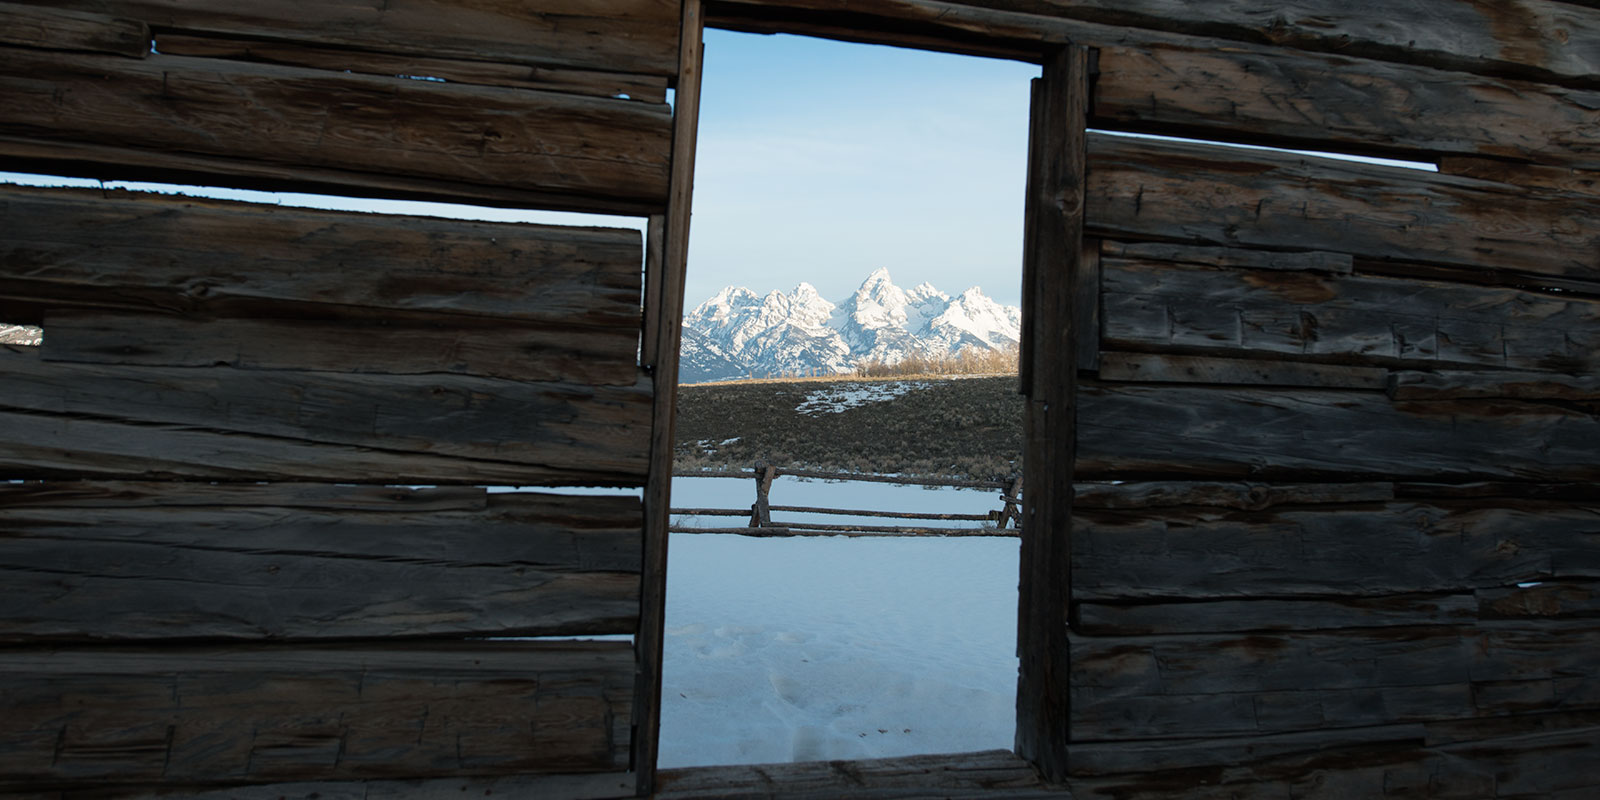 View from an old wooden barn window frame looking at snow capped Grand Tetons